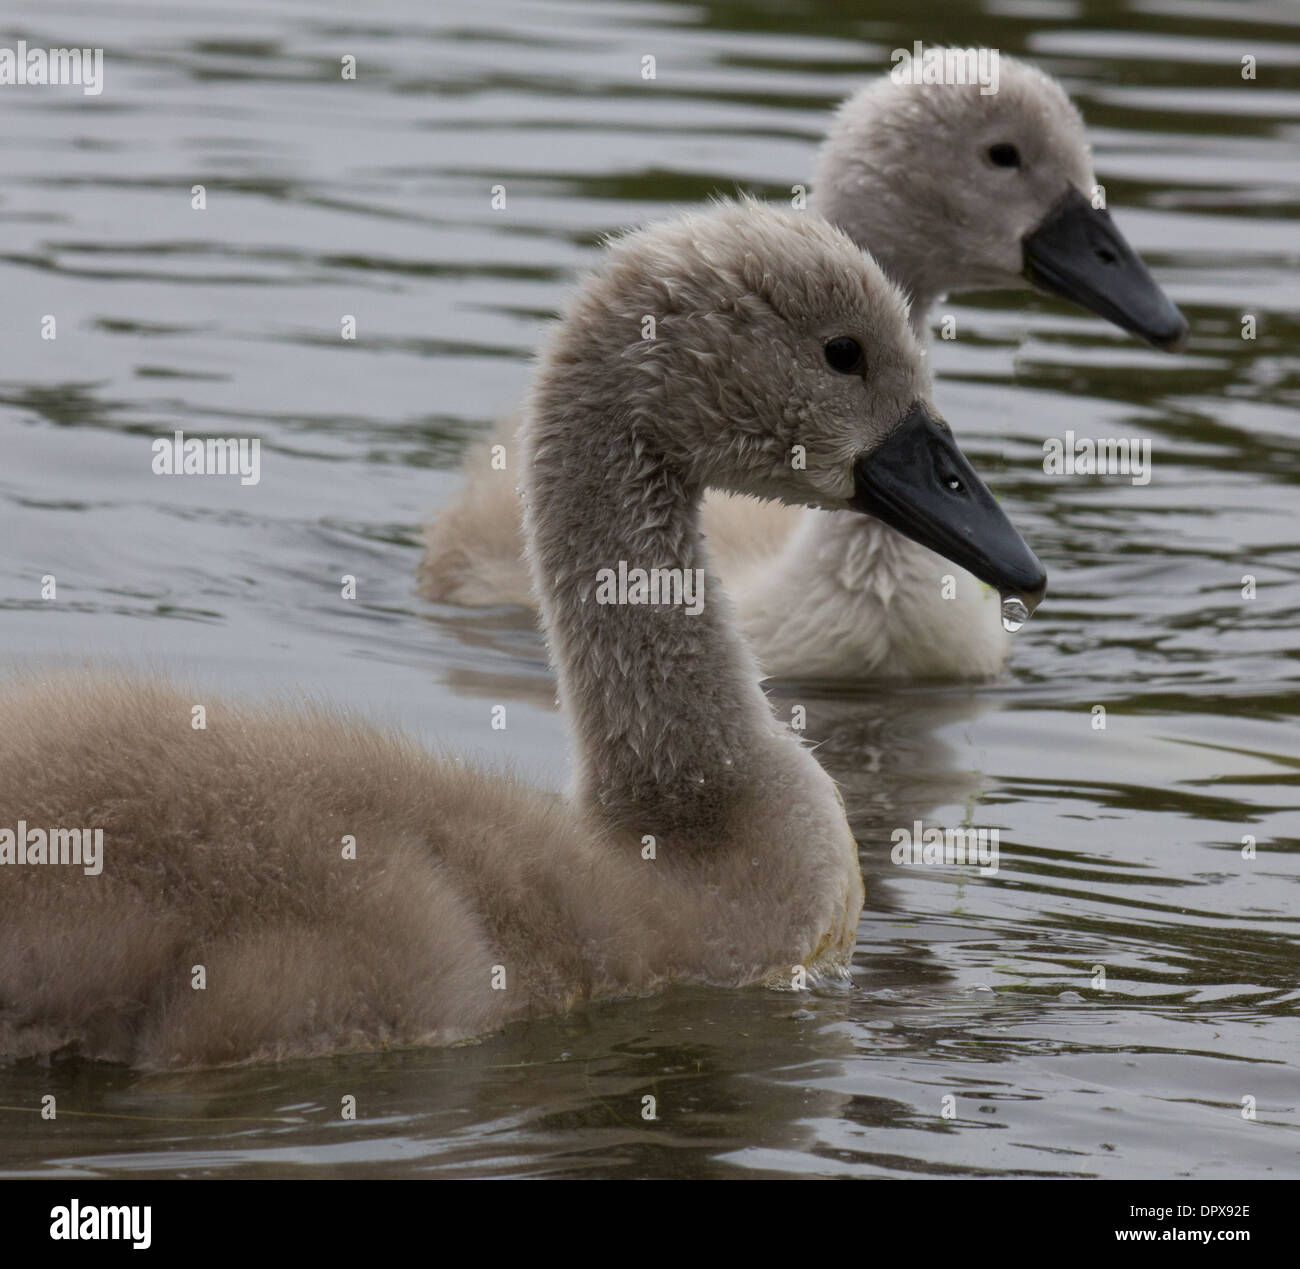 Pair of cygnets swimming in the same direction Stock Photo